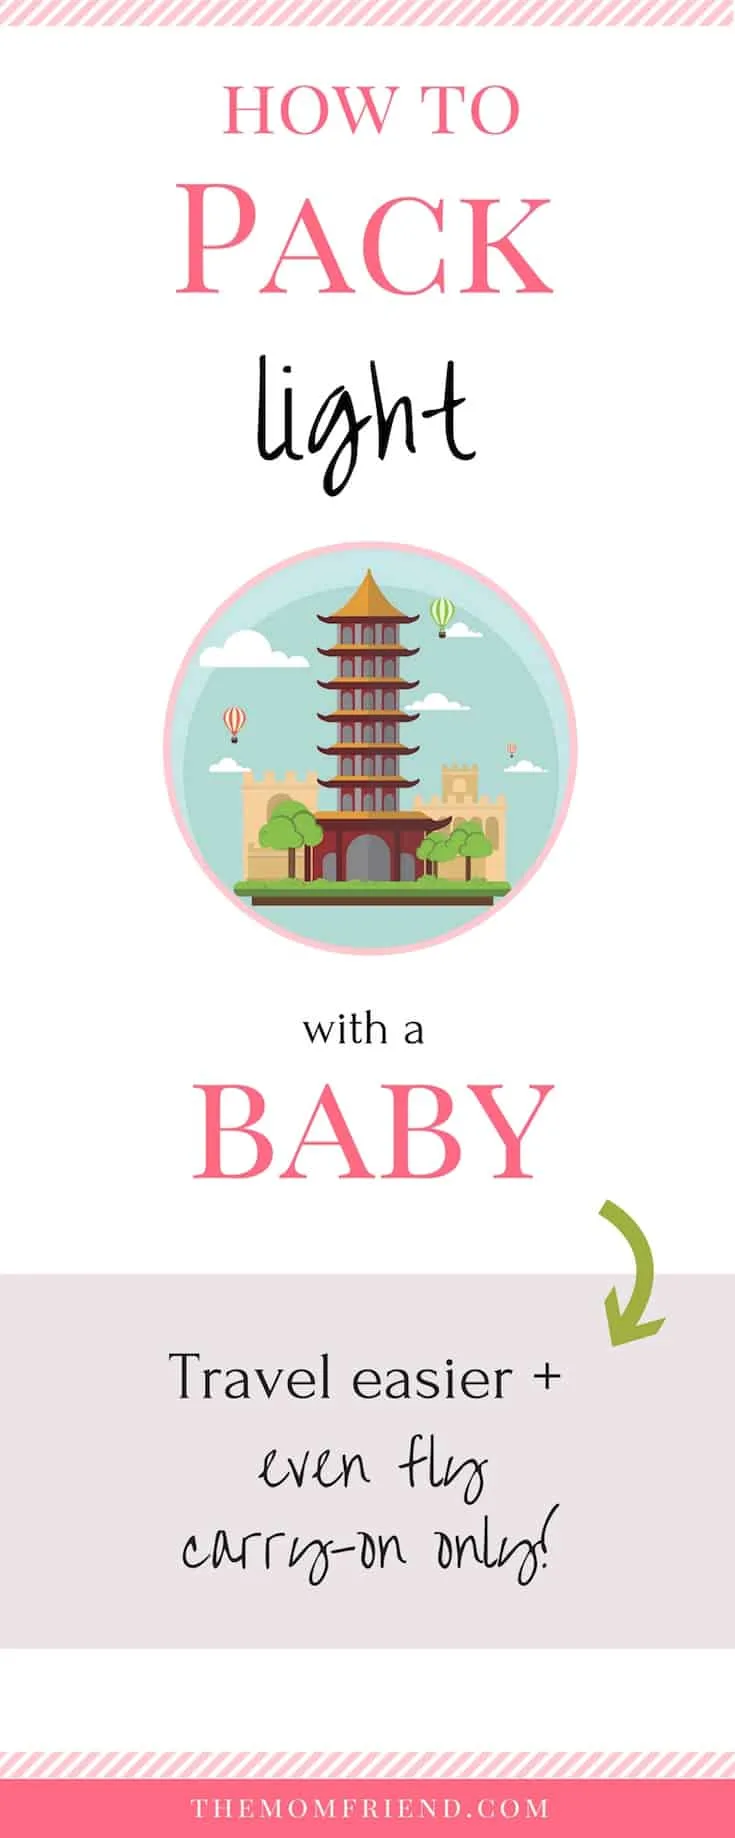 Pinnable image with text for How to Pack Light with a Baby.